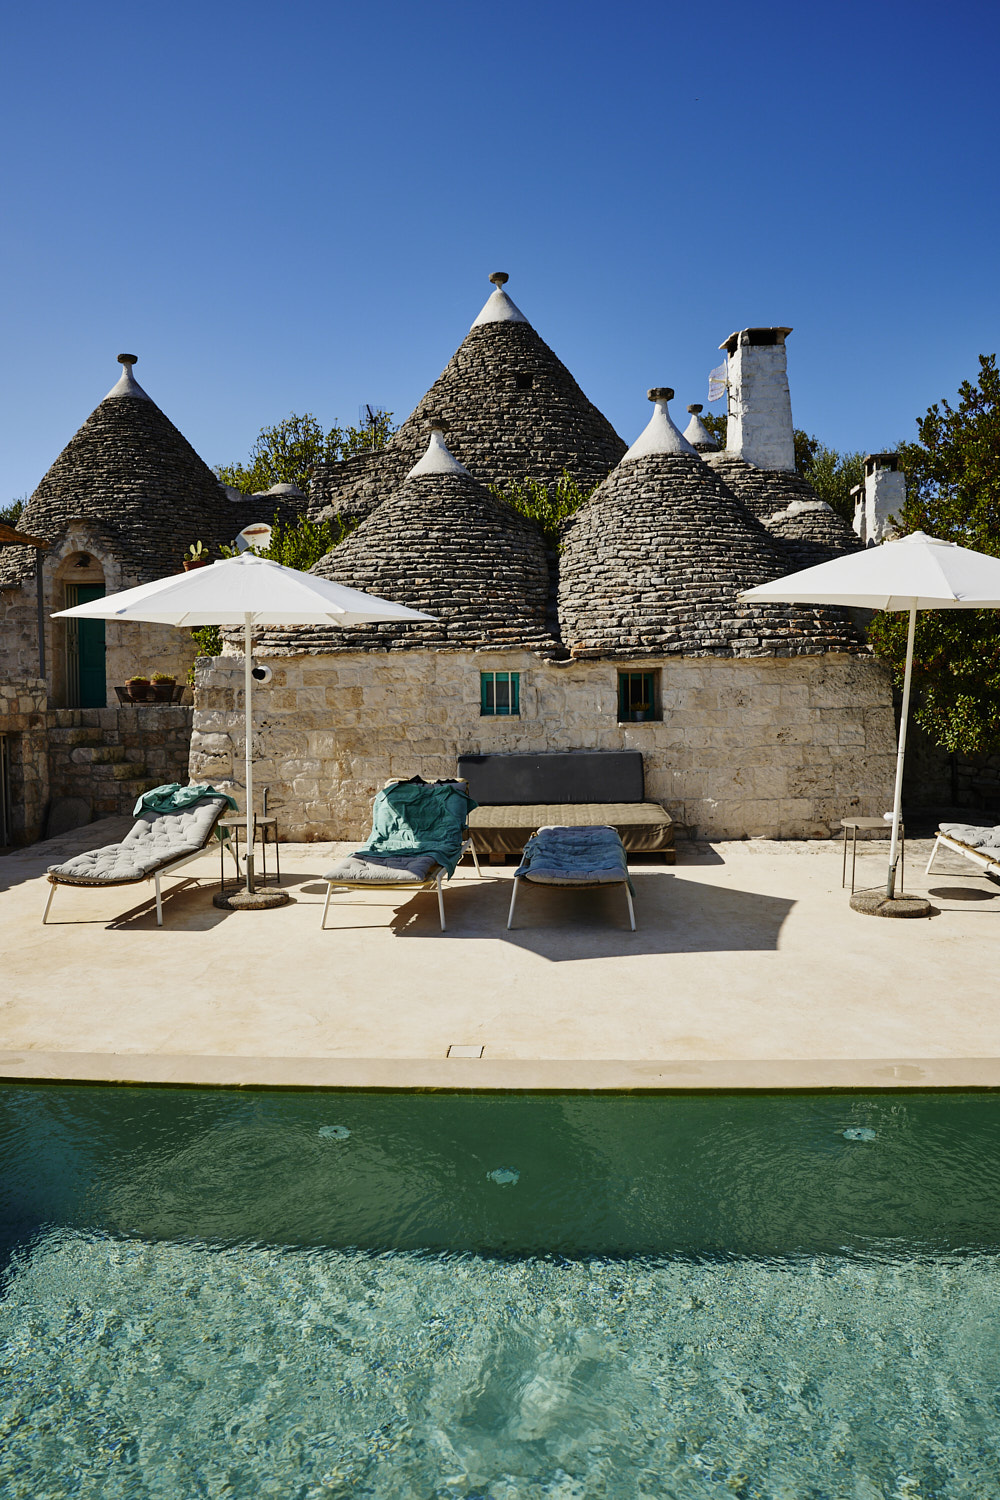 Another look at our Trullo in Alberobello